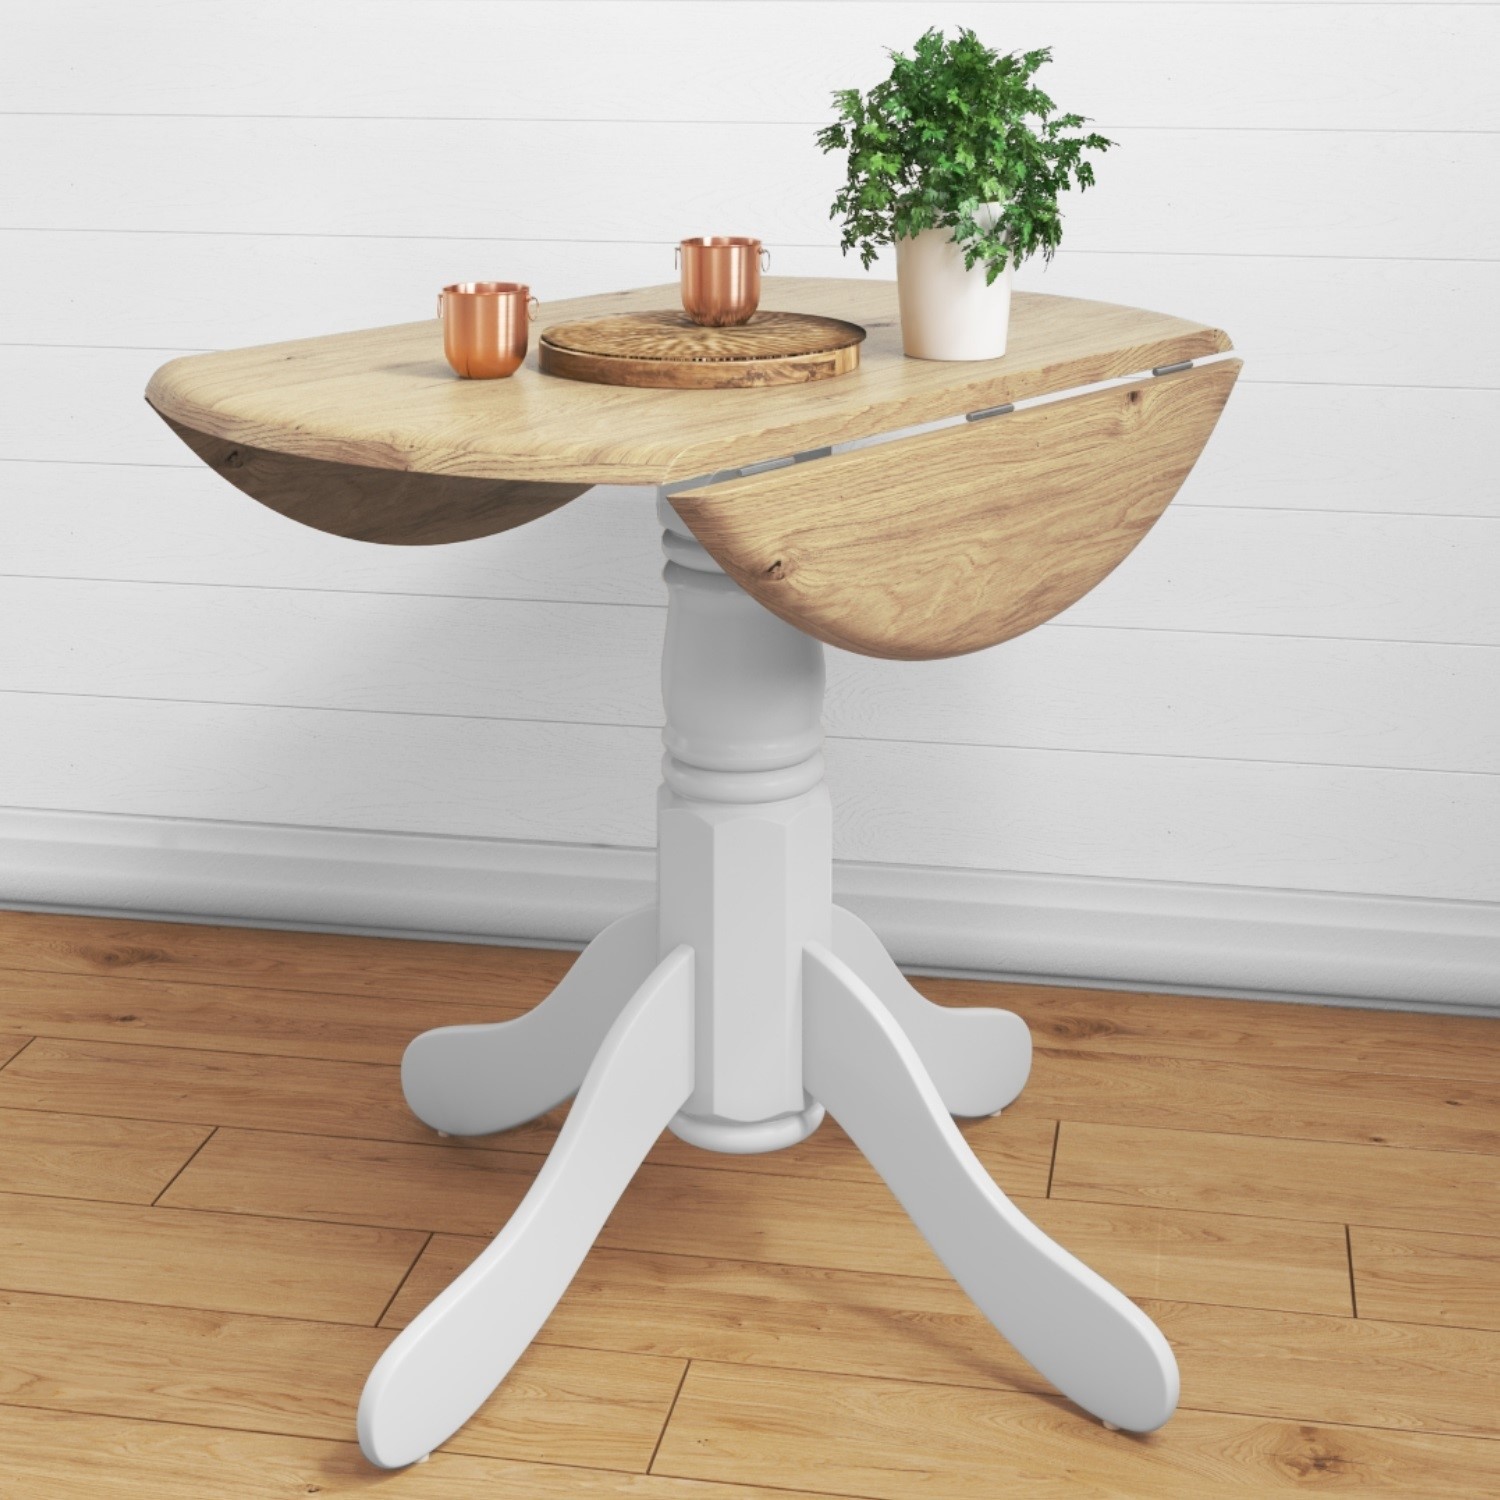 Small Round Drop Leaf Table In White Wood 2 Seater Rhode